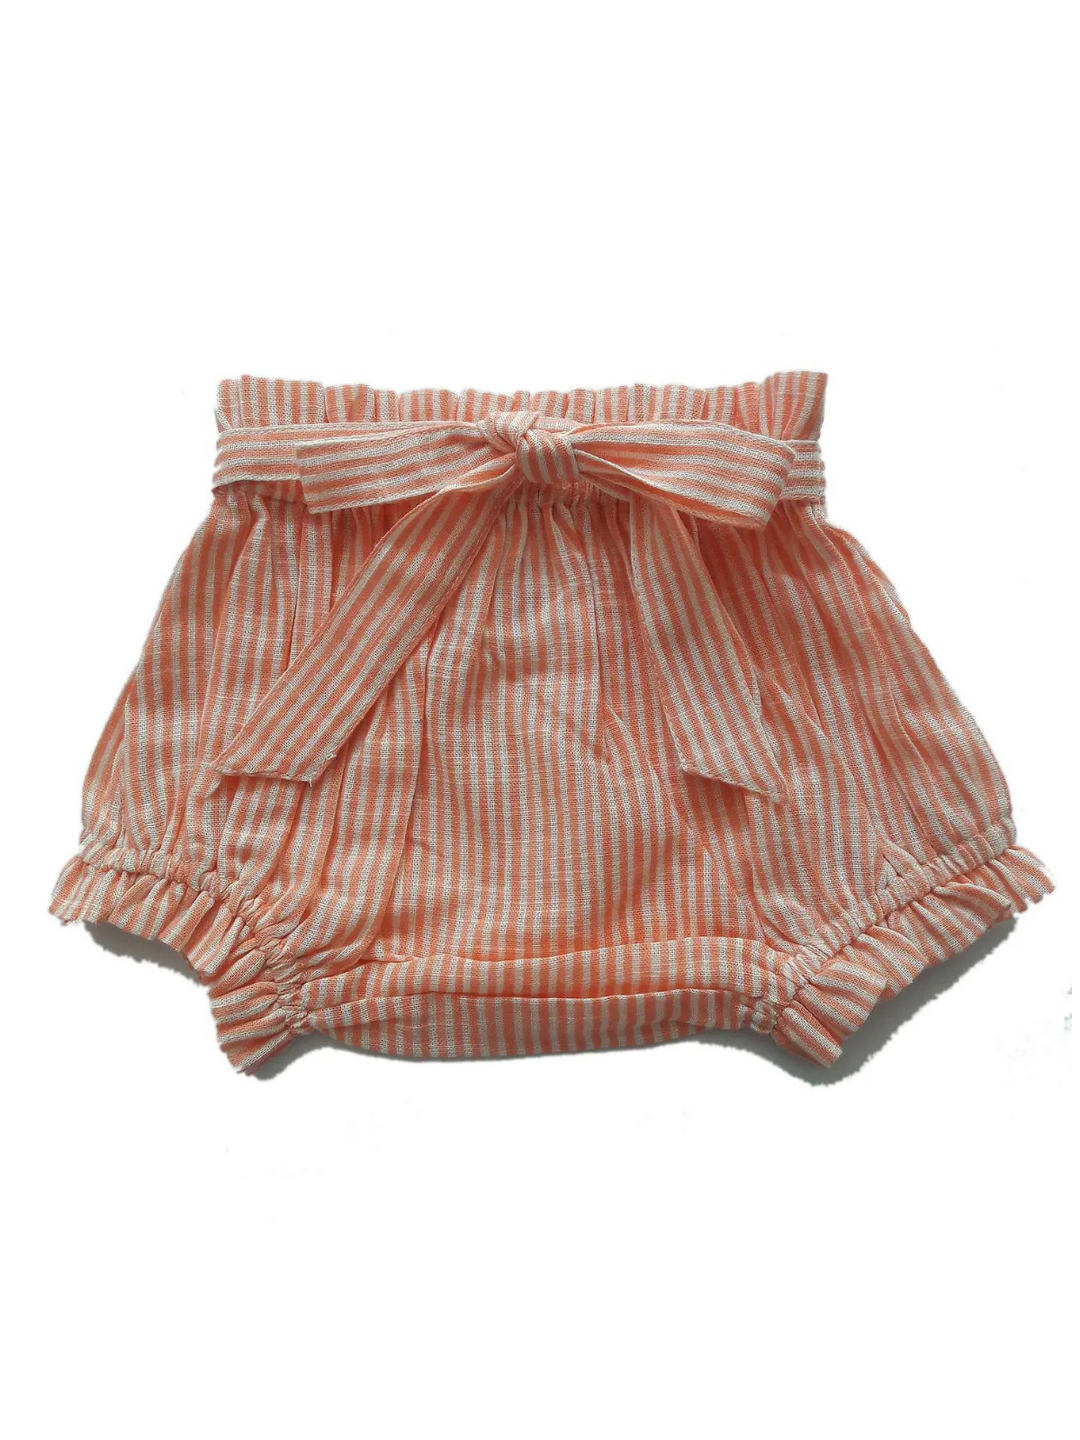 Cora Striped Bloomers